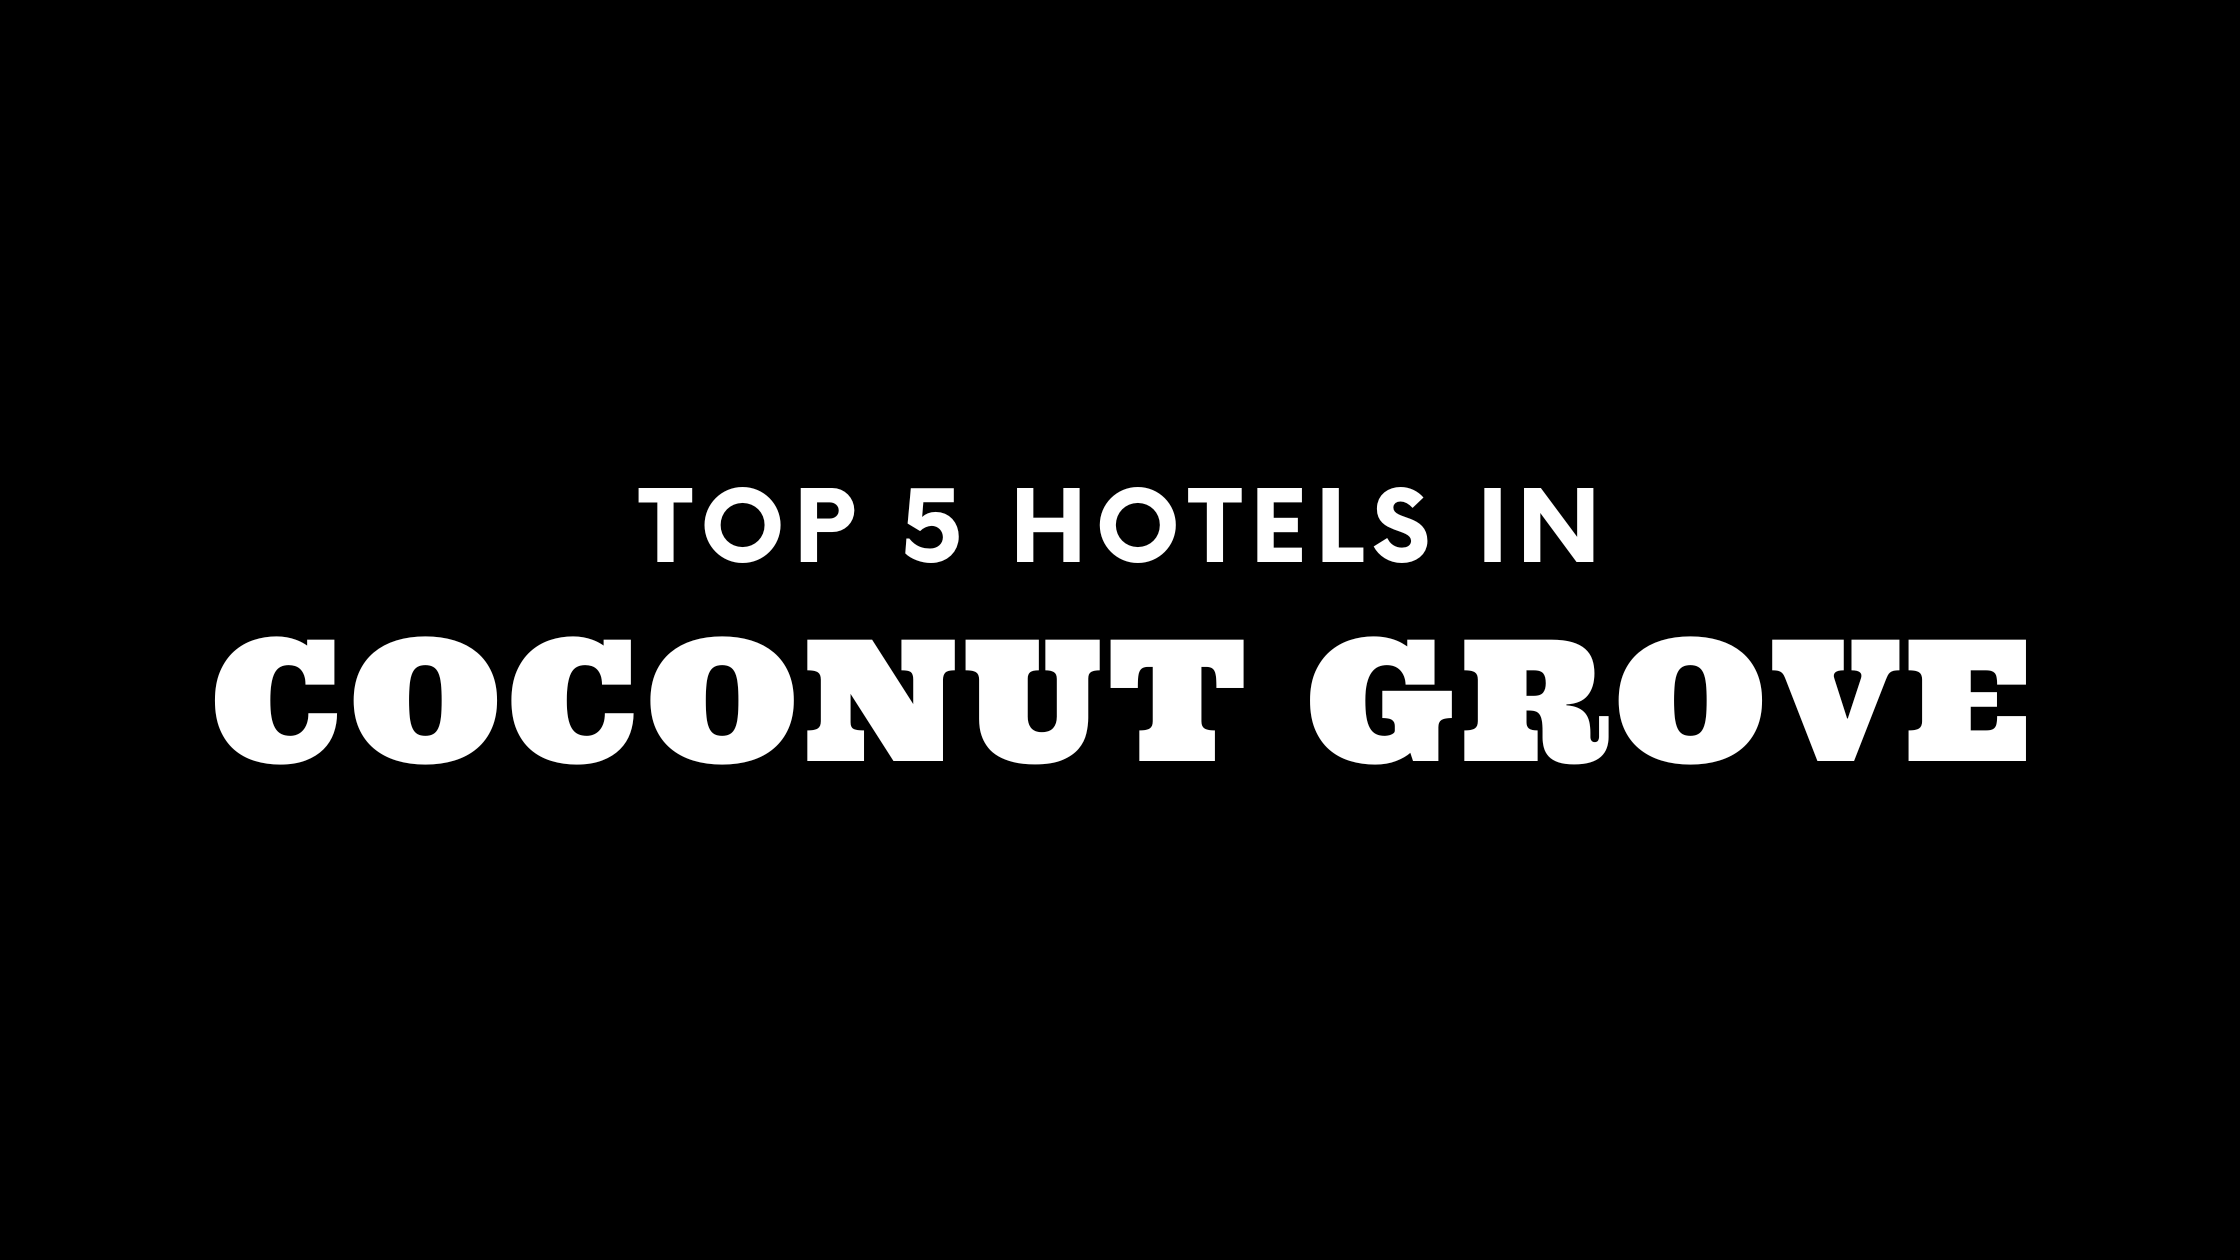 Top 5 Hotels in Coconut Grove